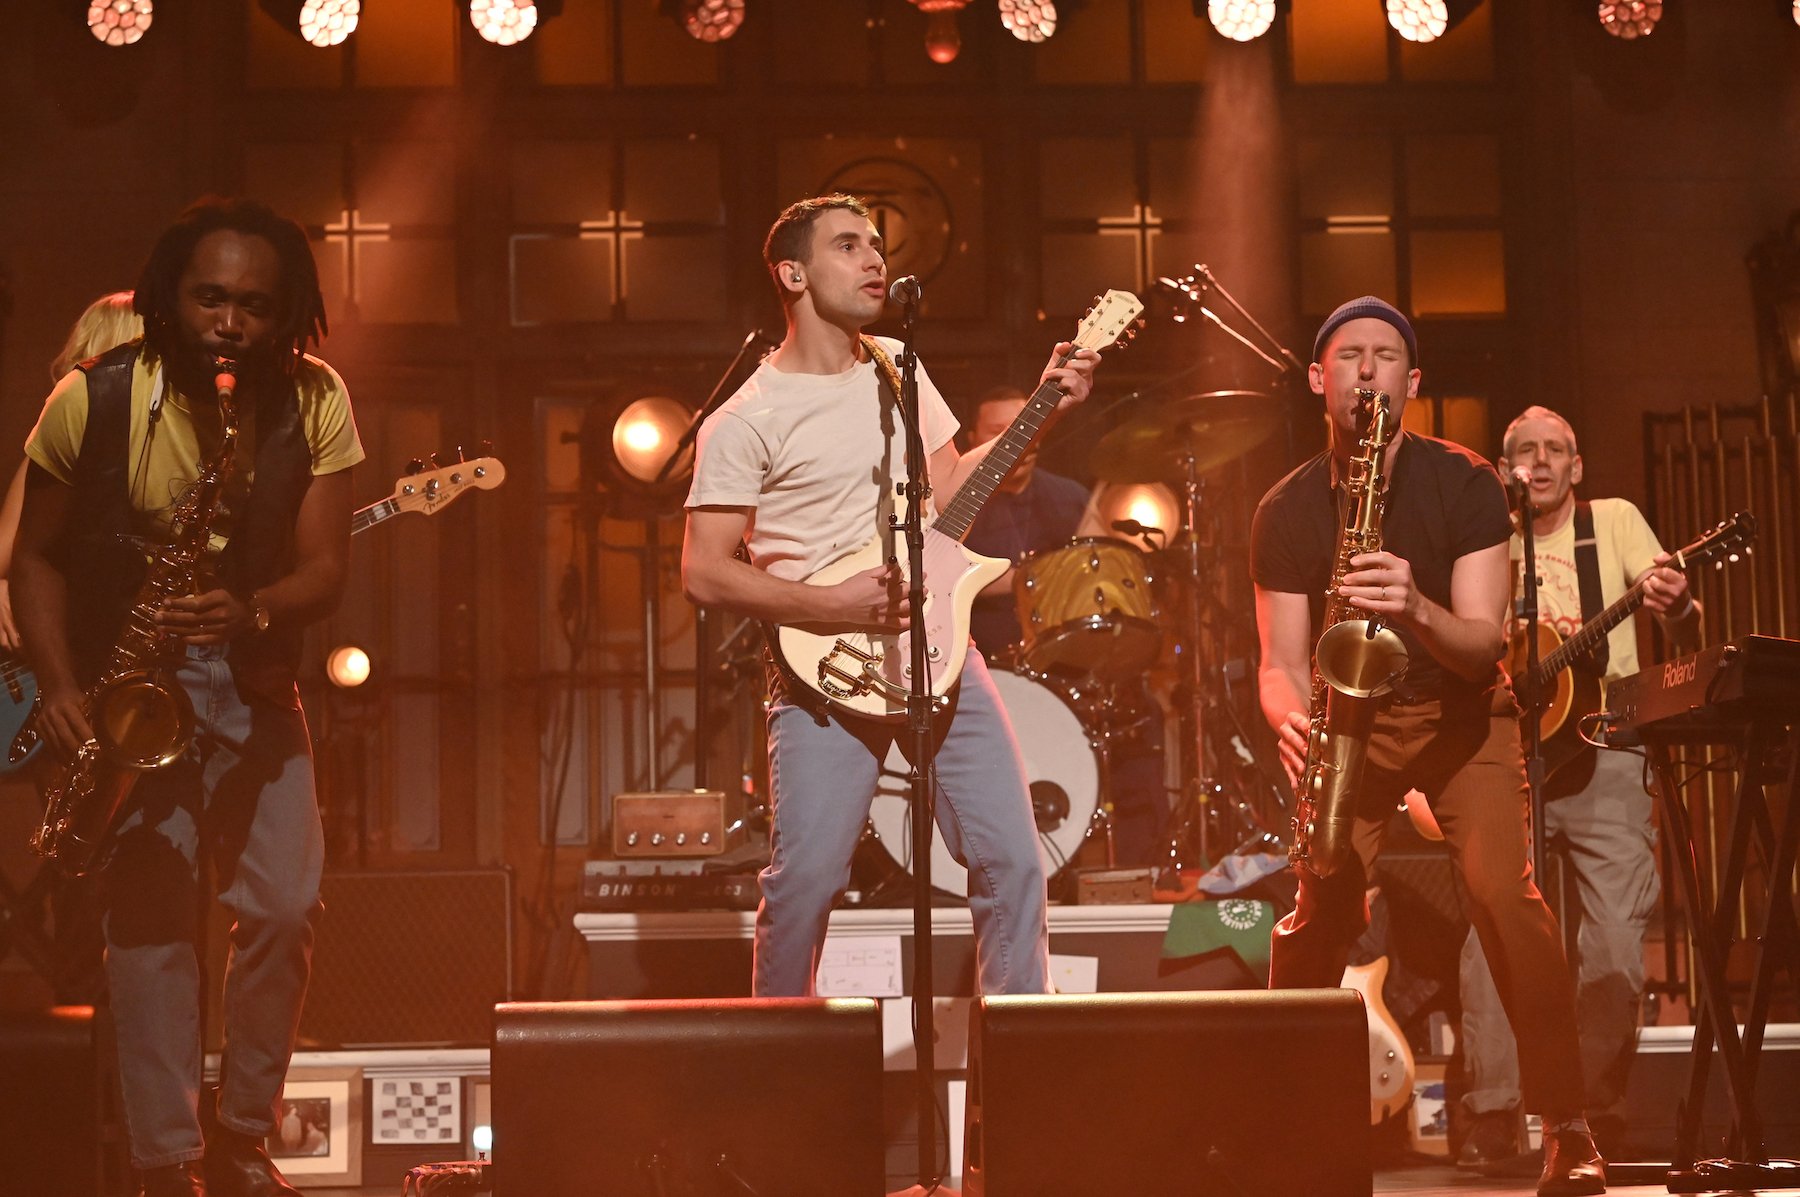 'Saturday Night Live' with musical guests Bleachers performing 'How Dare You Want More'